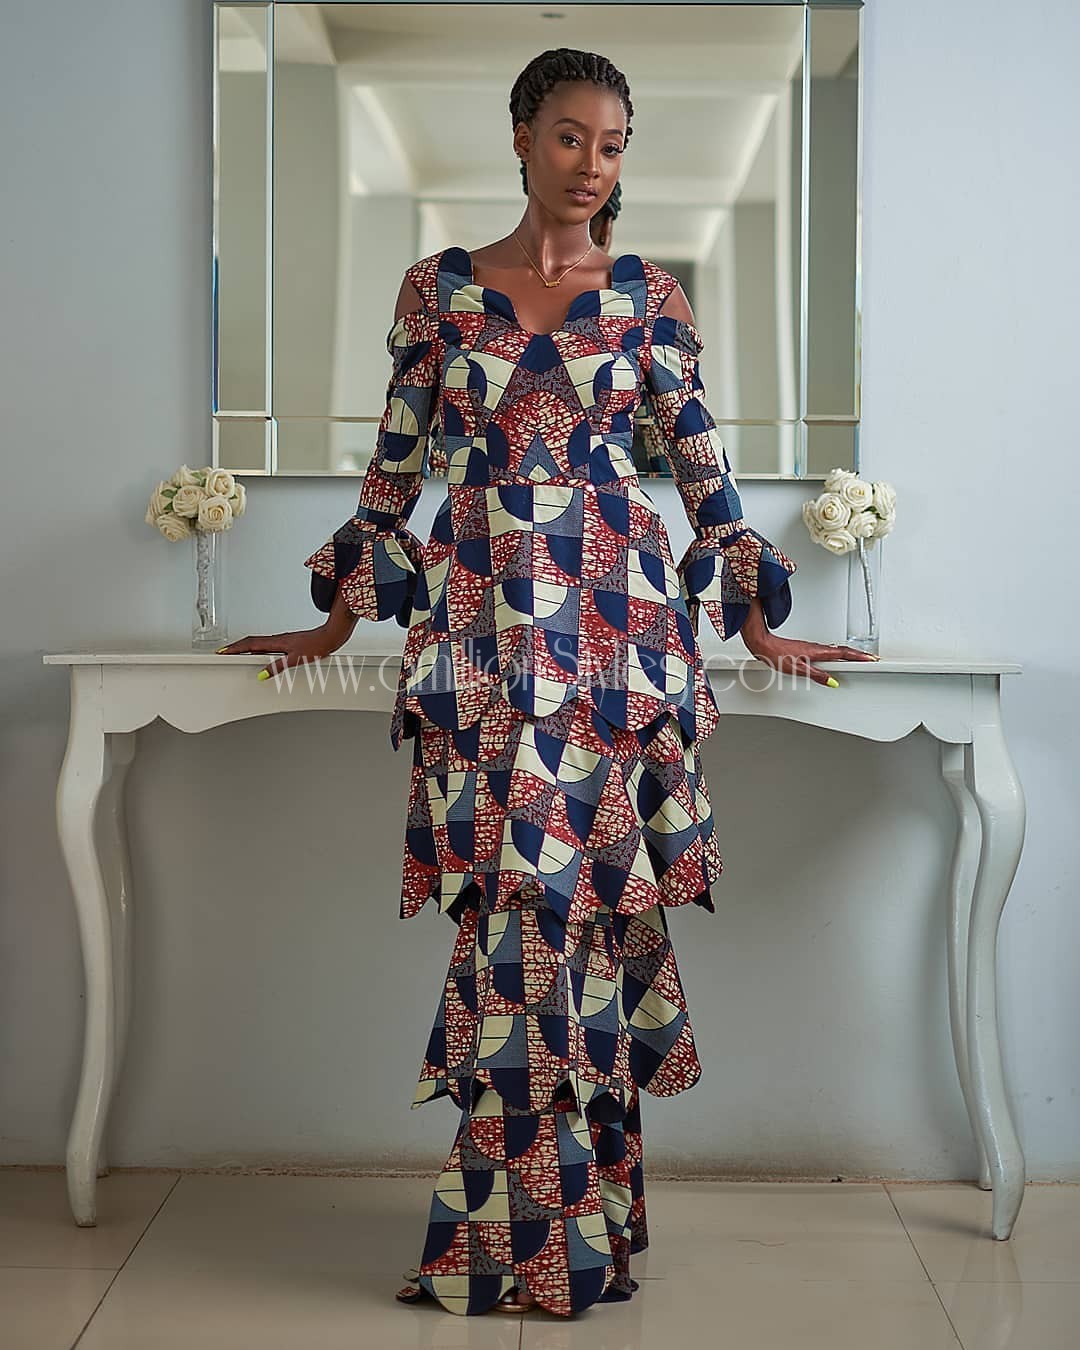 Check Out 11 Of The Coolest Ankara Styles Gang